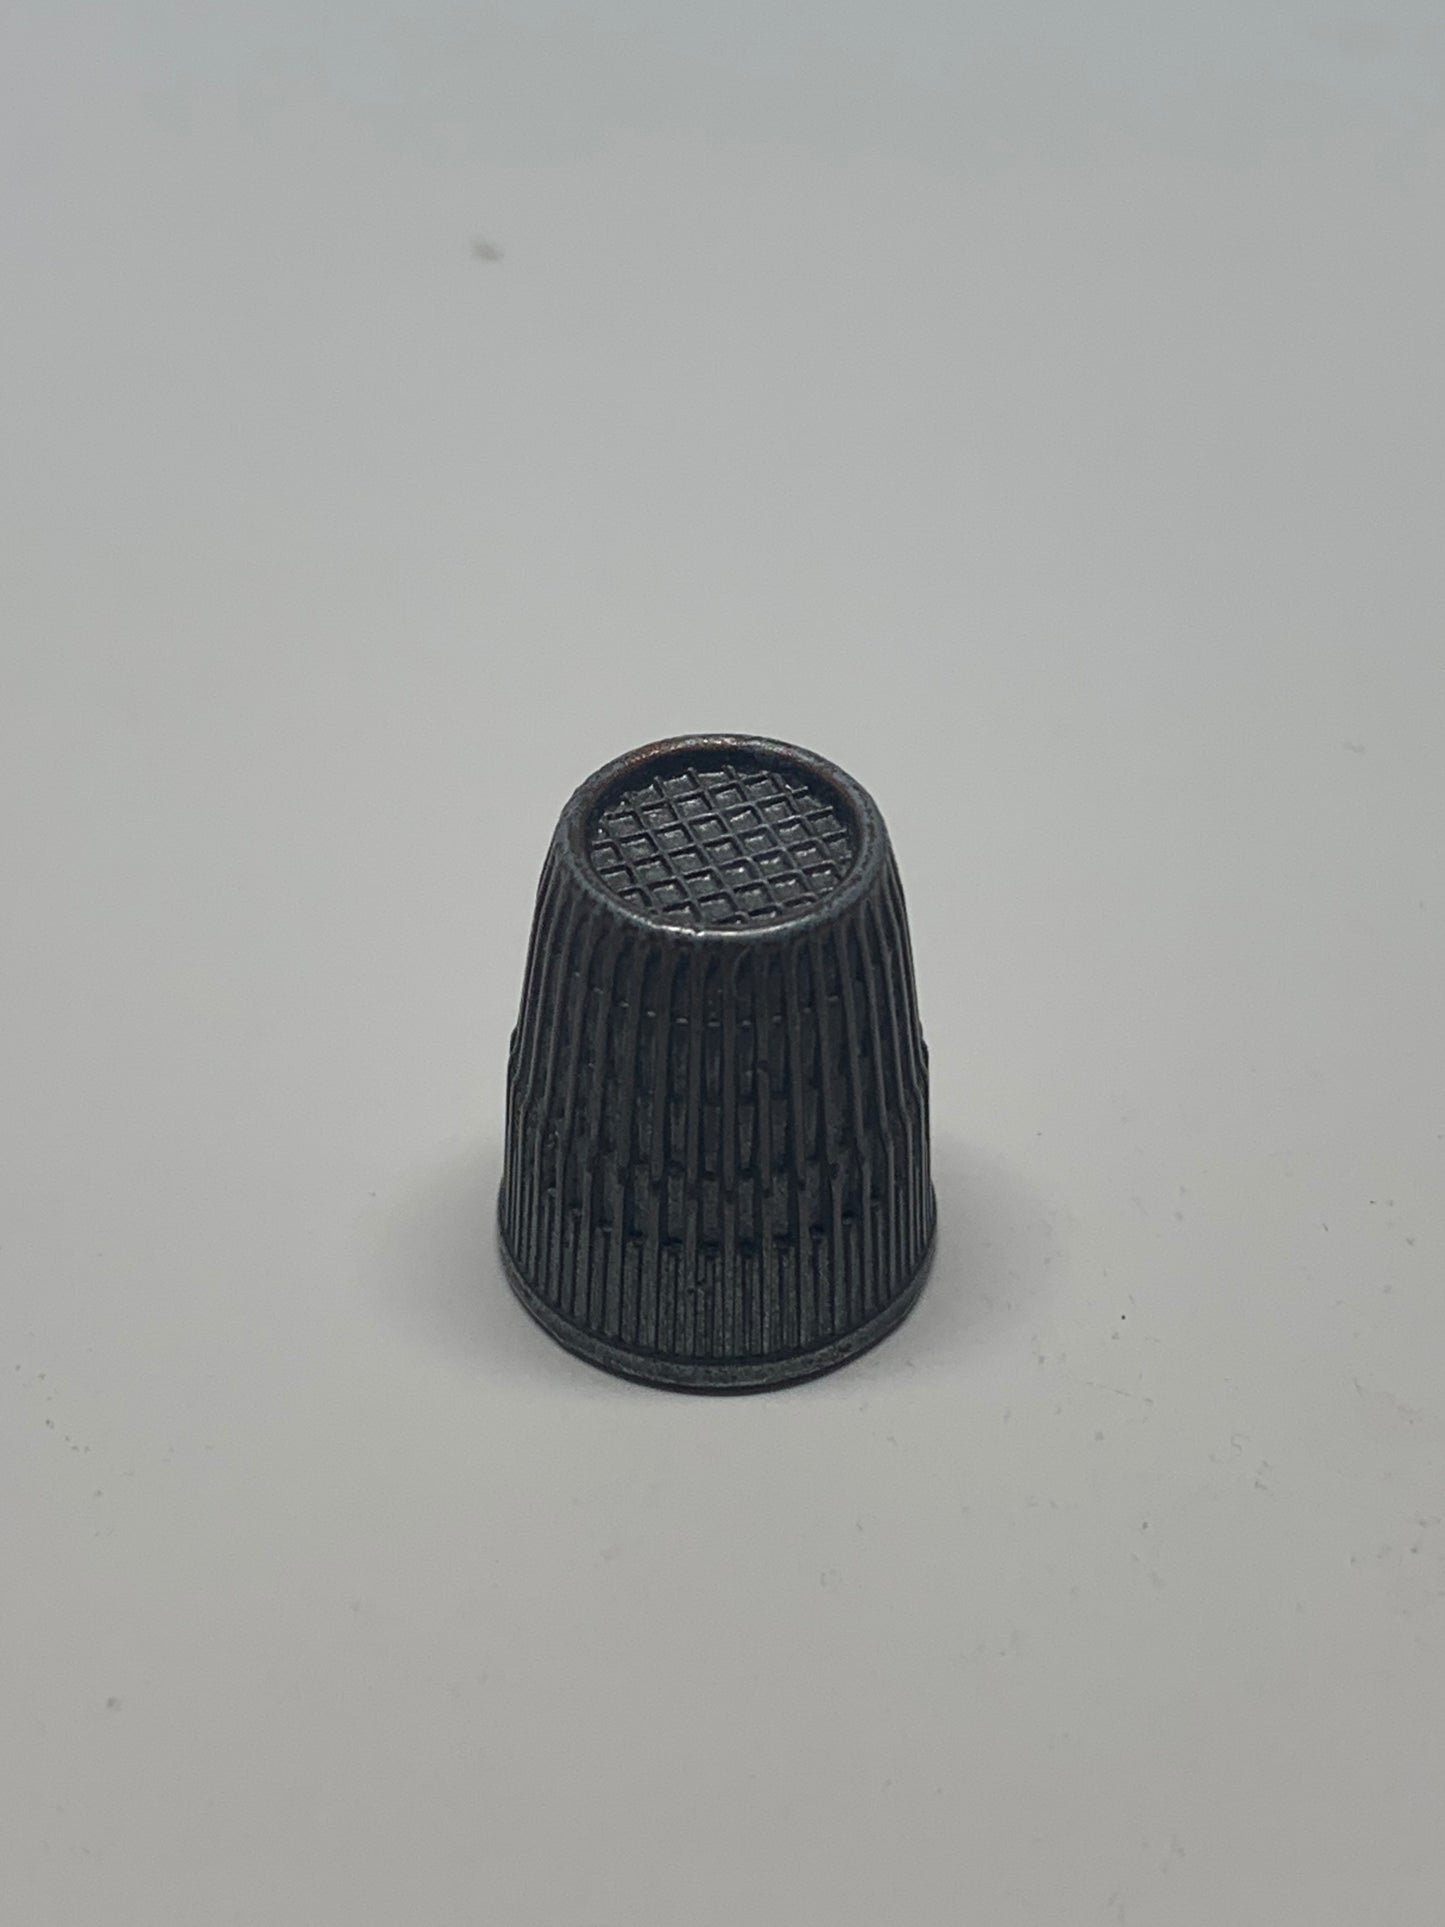 Vintage Thimble 8 Made in Germany